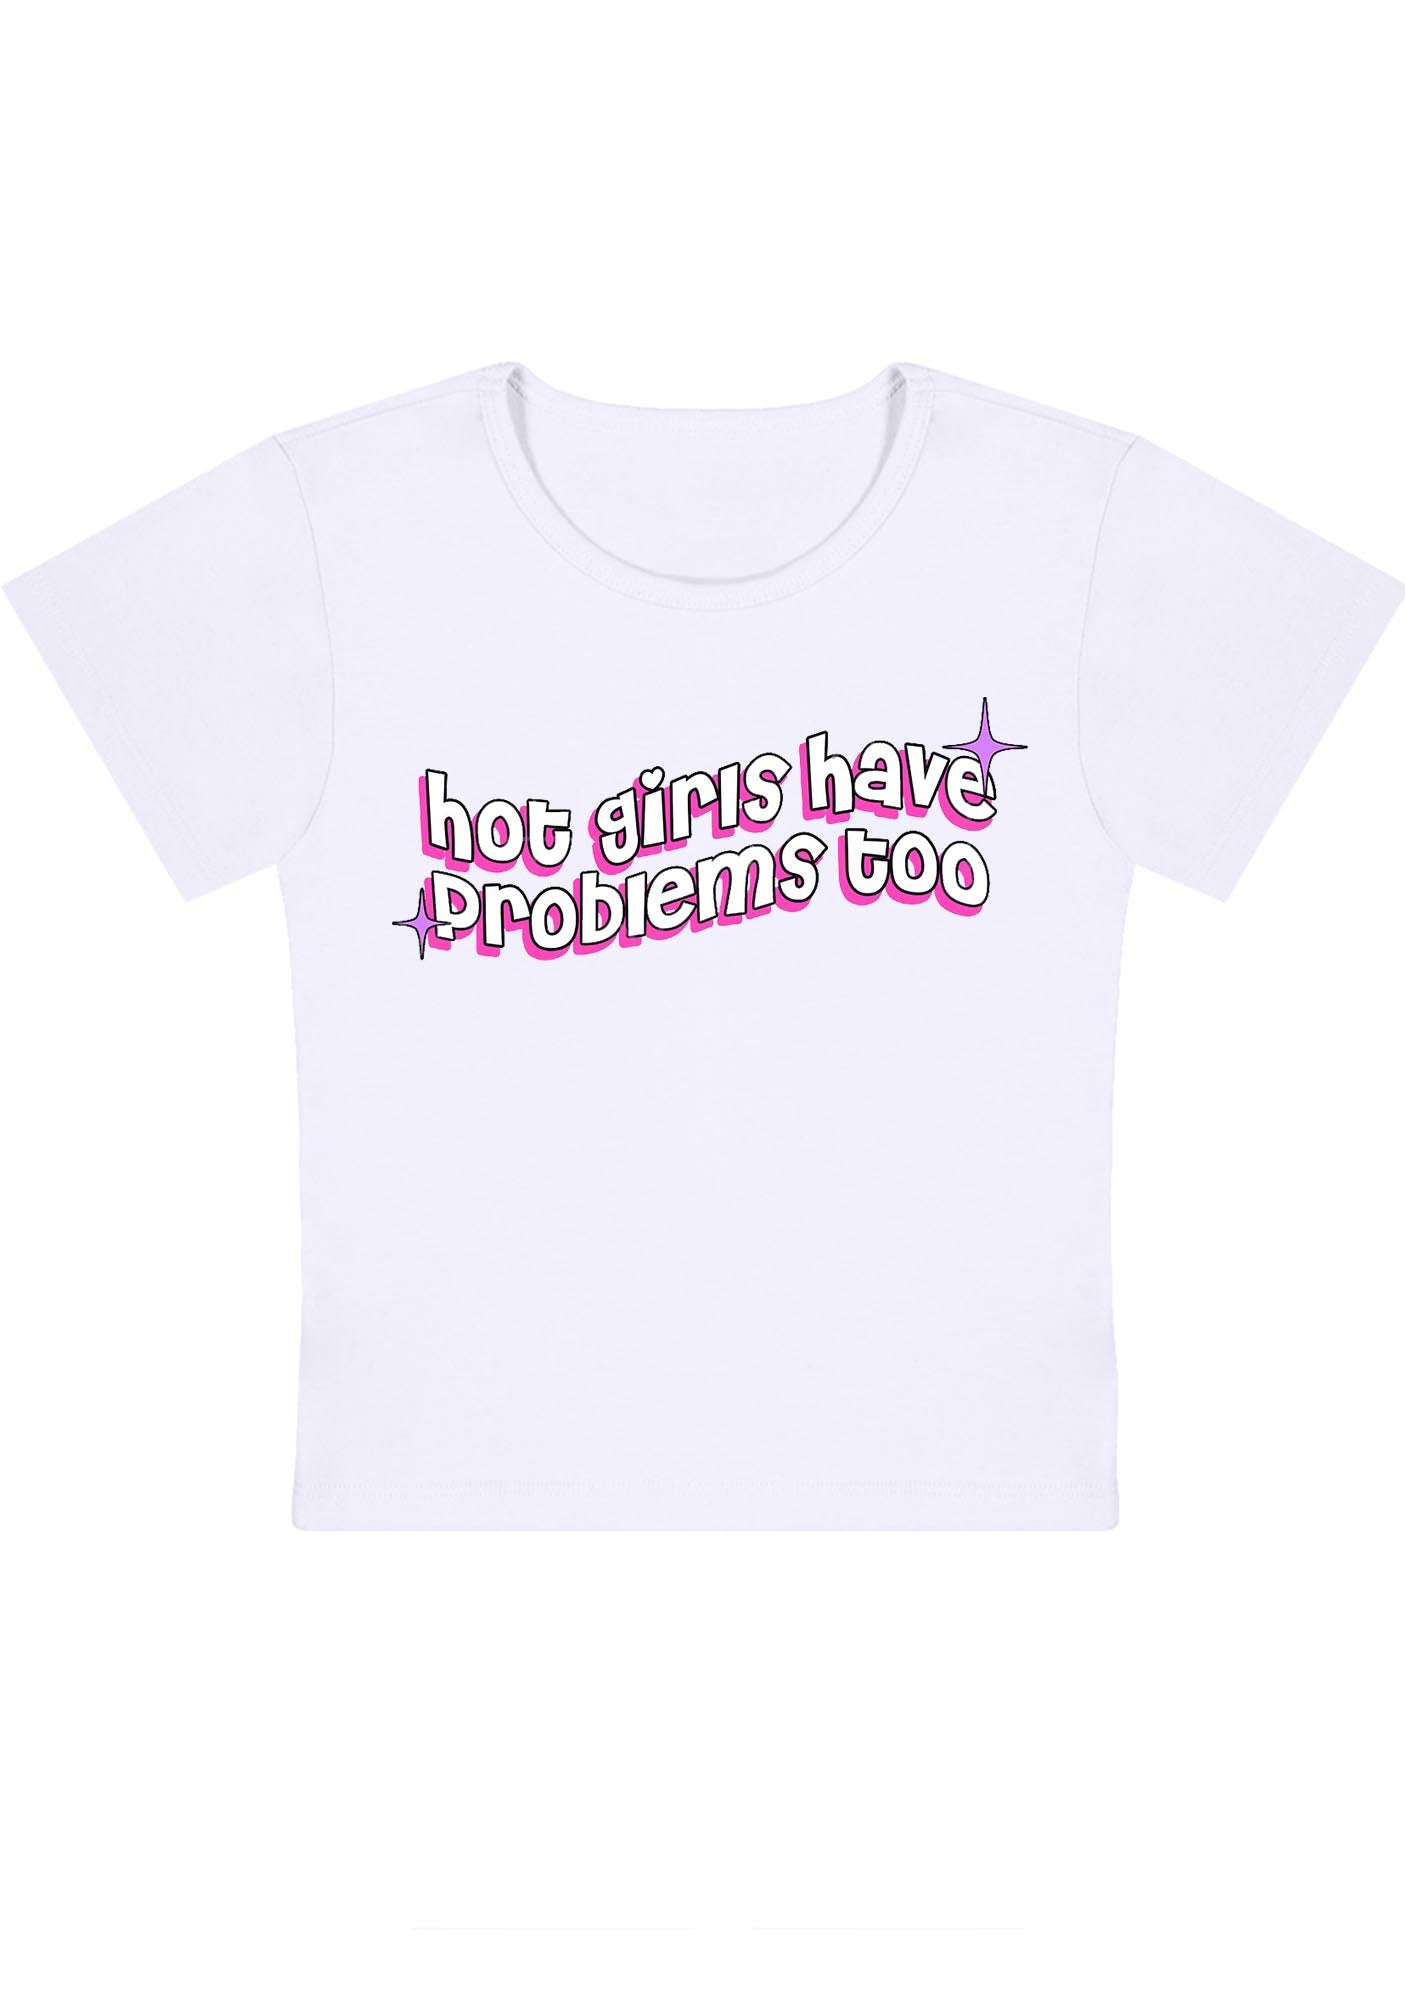 Hot Girls Have Problems Too Y2K Baby Tee